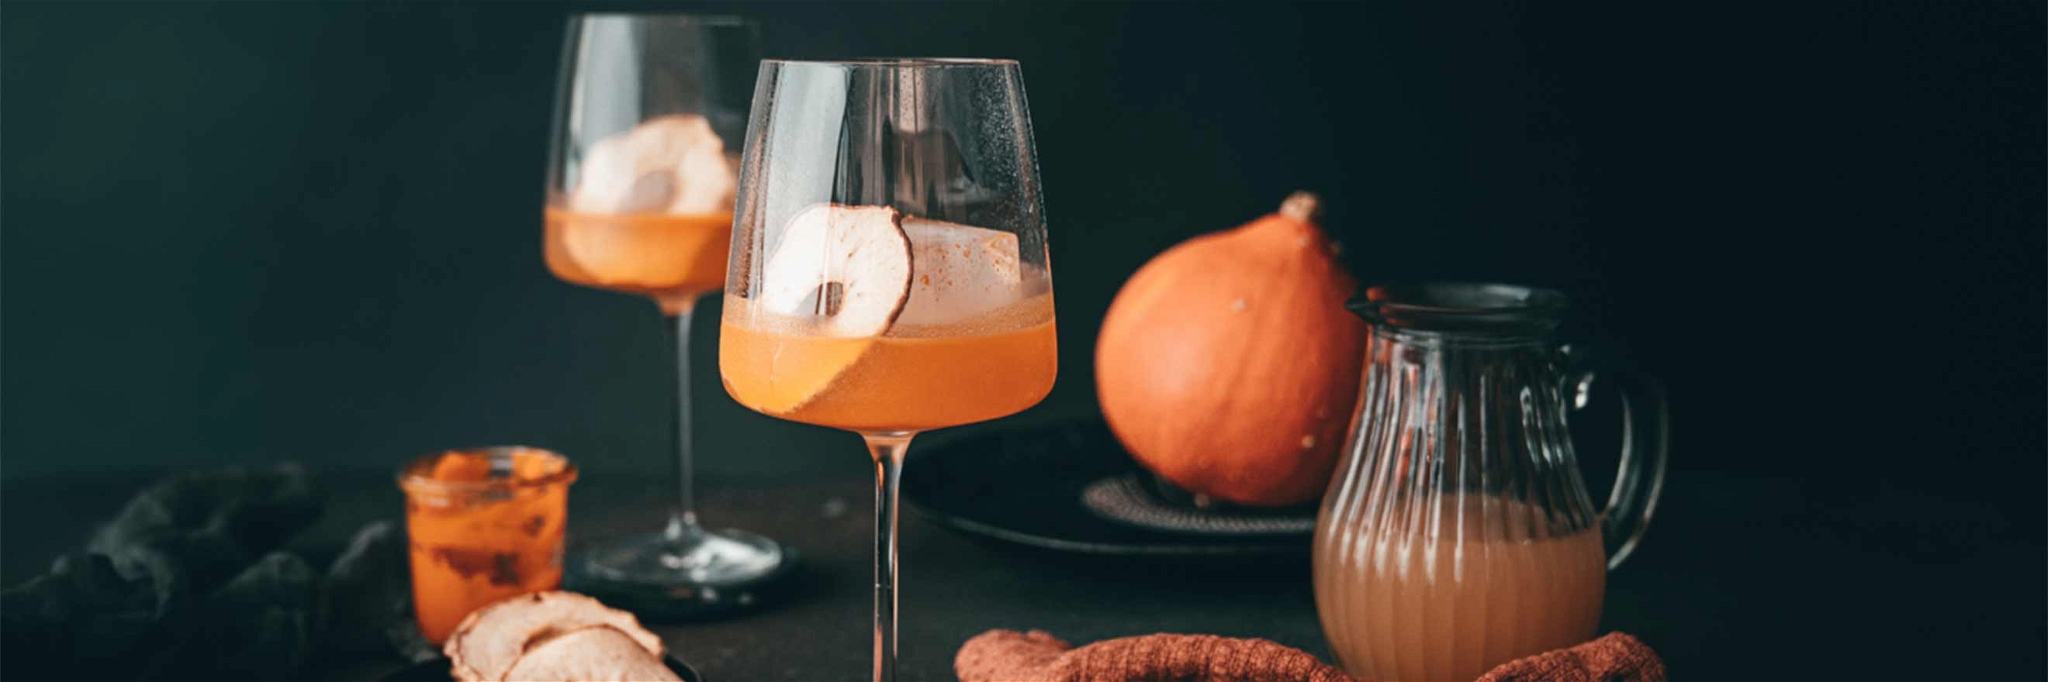 This autumnal cocktail looks particularly good served in Zwiesel wine glass.&nbsp;